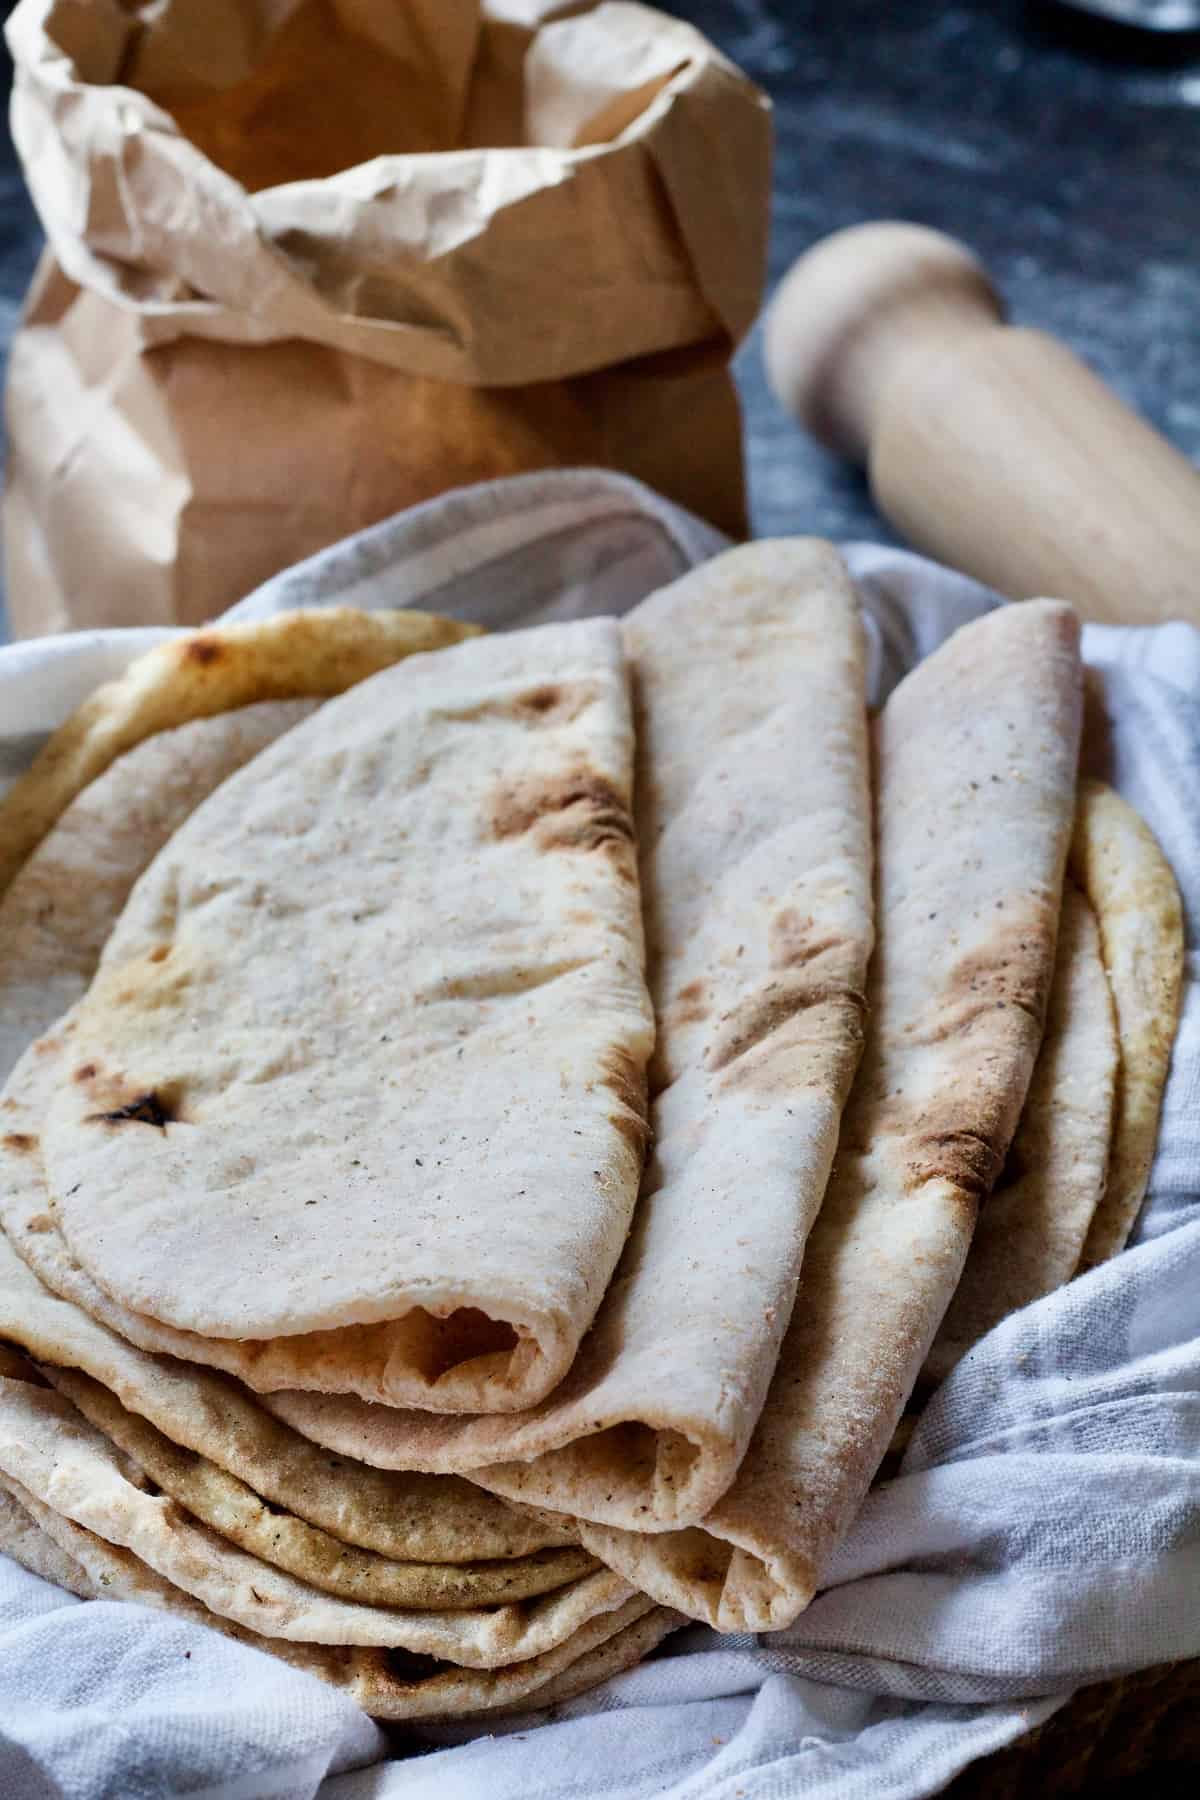 Folded flatbreads resting on a towel.